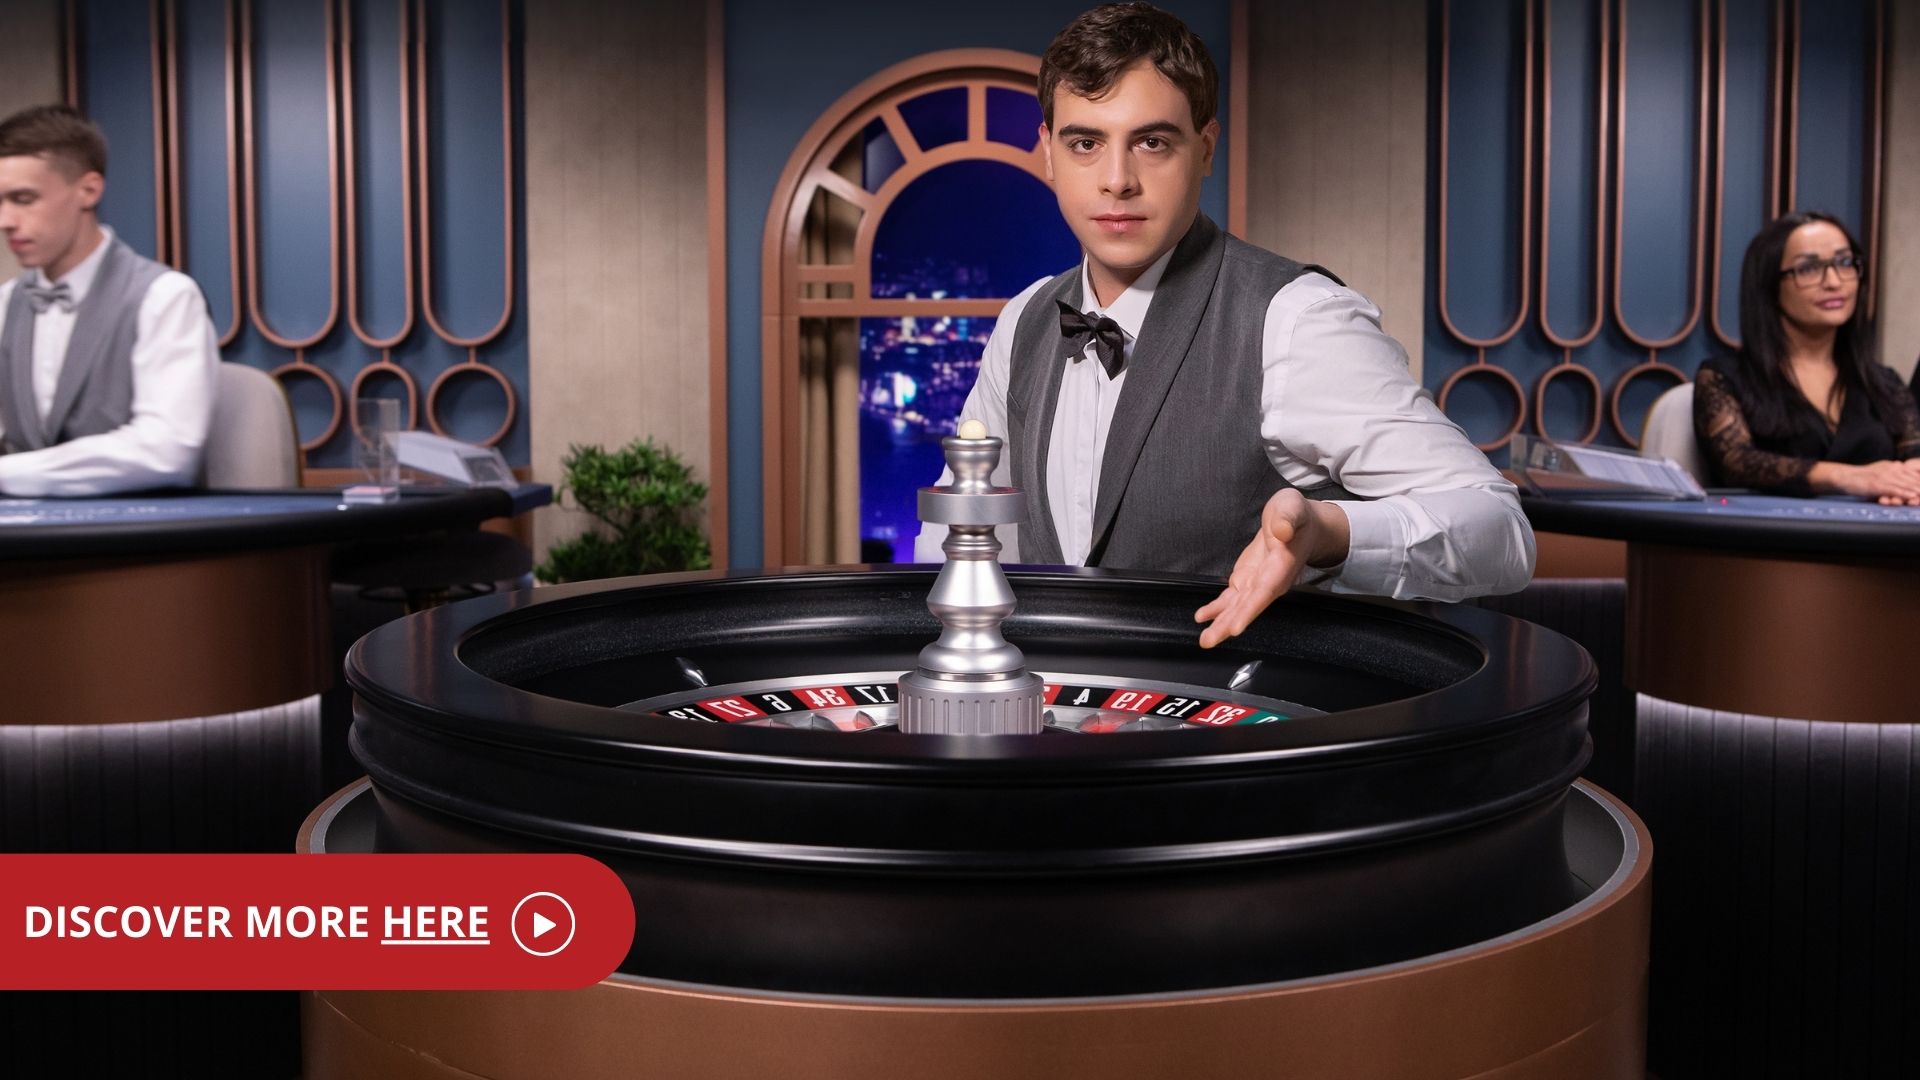 Male game presenter behind a roulette wheel in Speed Roulette reading 'discover more here'.